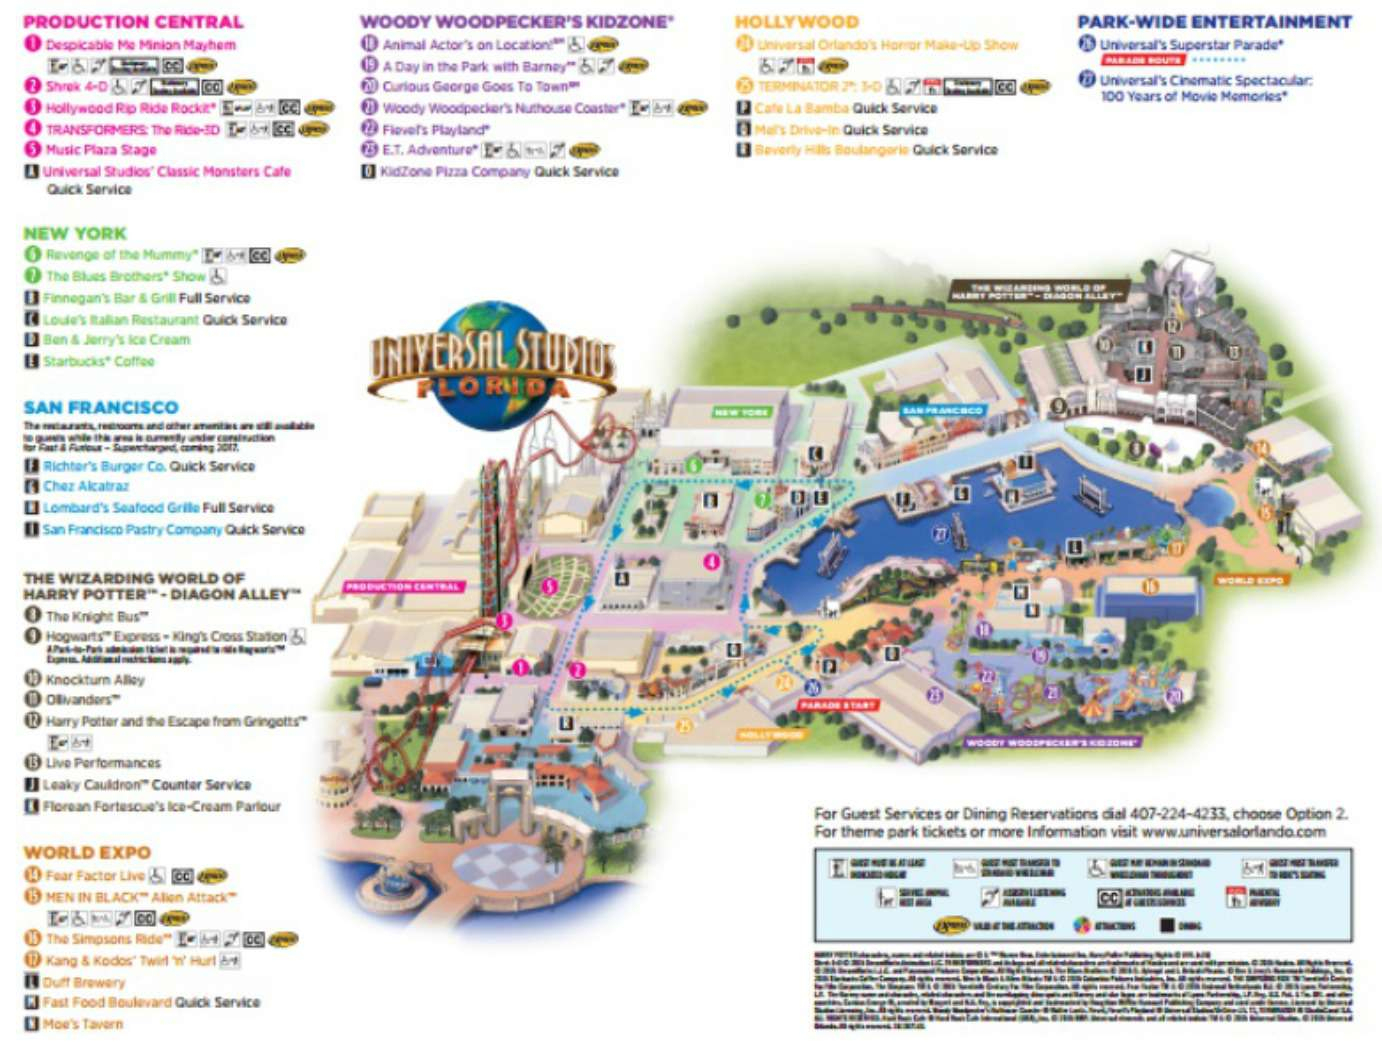 Maps Of Universal Orlando Resort's Parks And Hotels - Universal Florida Park Map